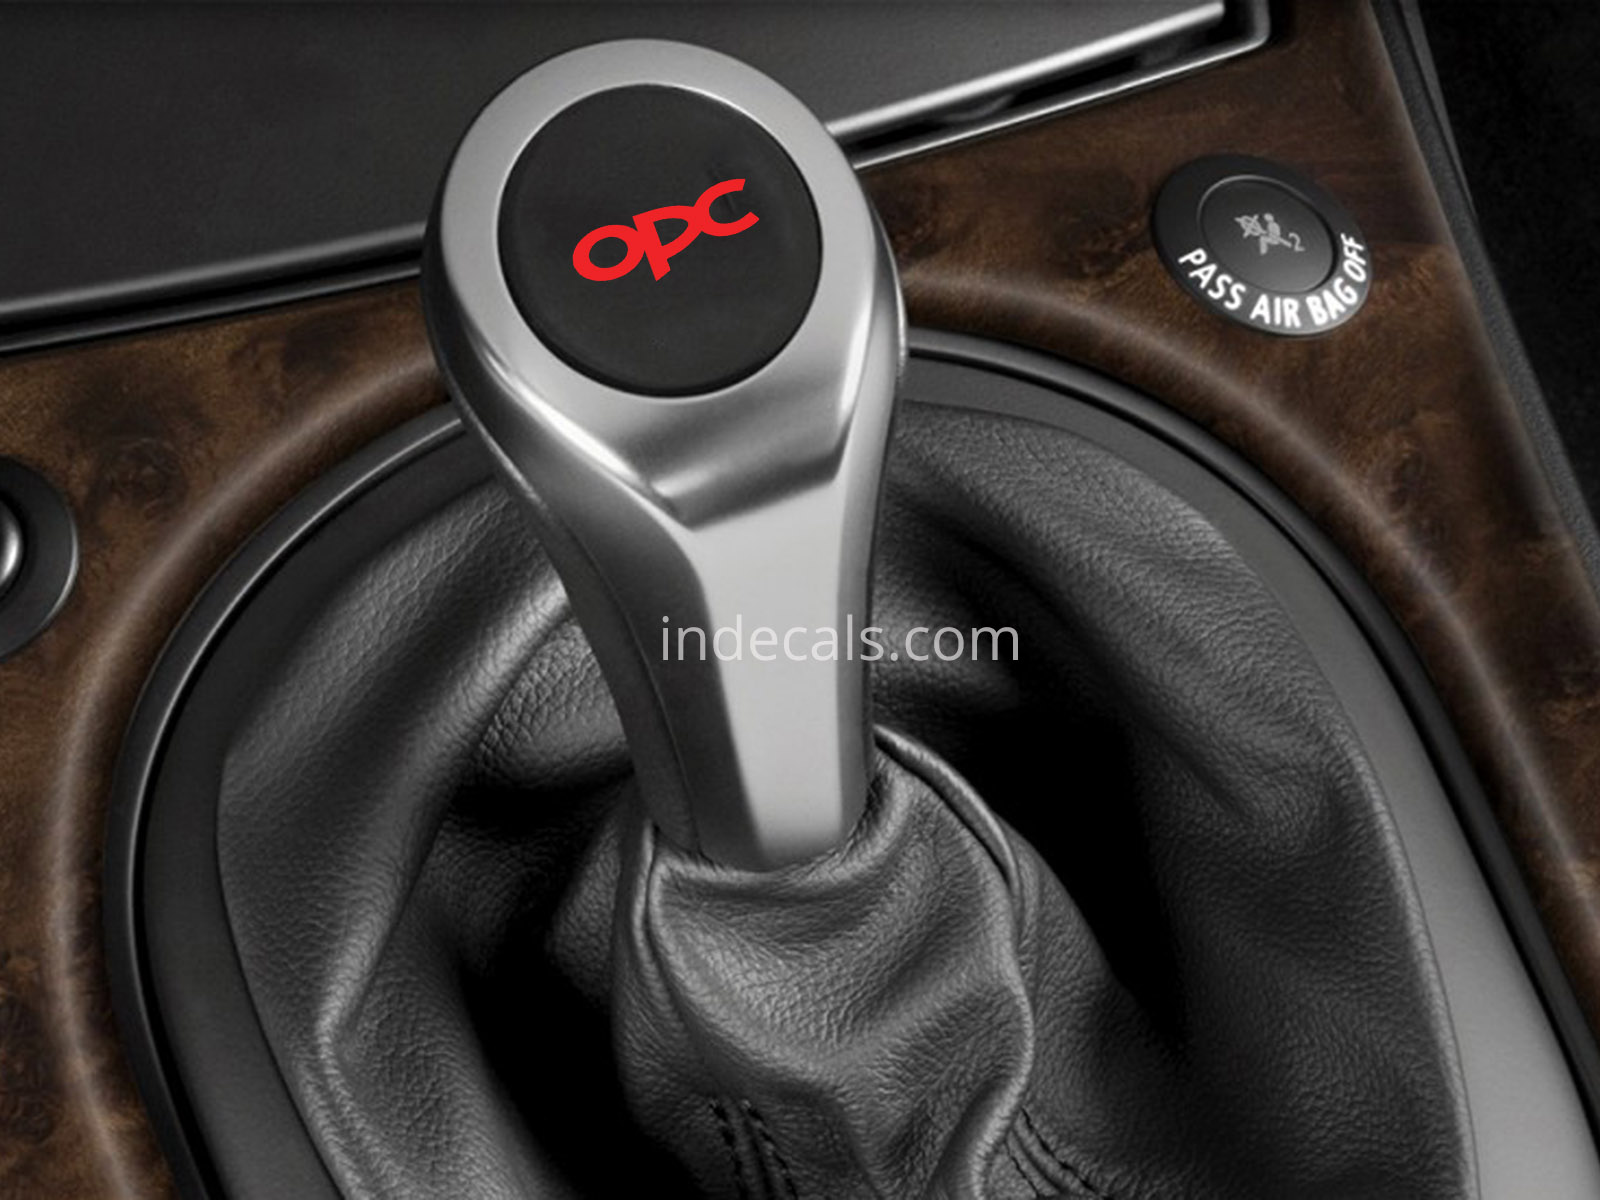 3 x Opel OPC Stickers for Gear Knob - Red